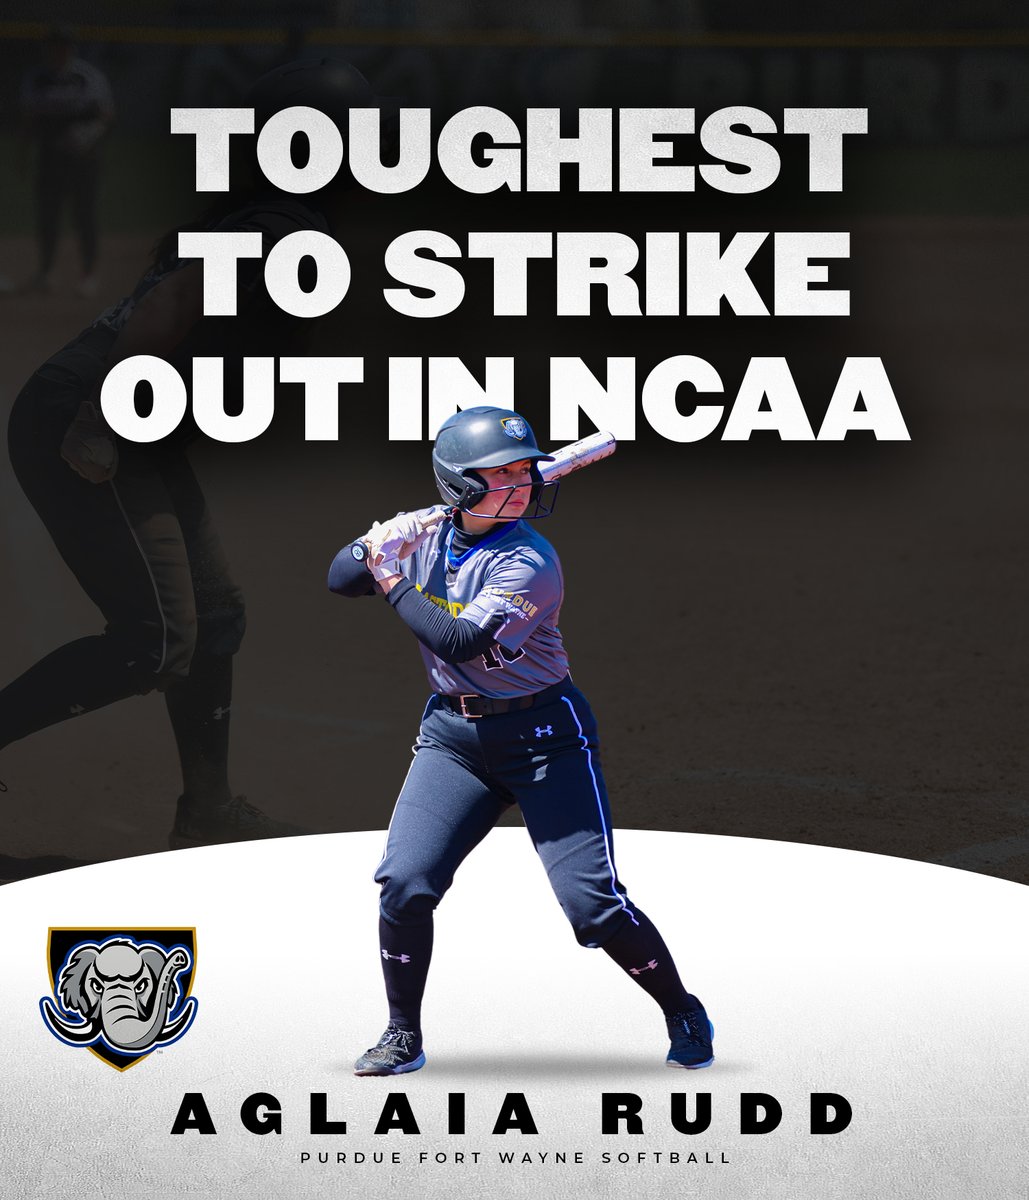 She's only been struck out four times this season. #FeelTheRumble #HLSB